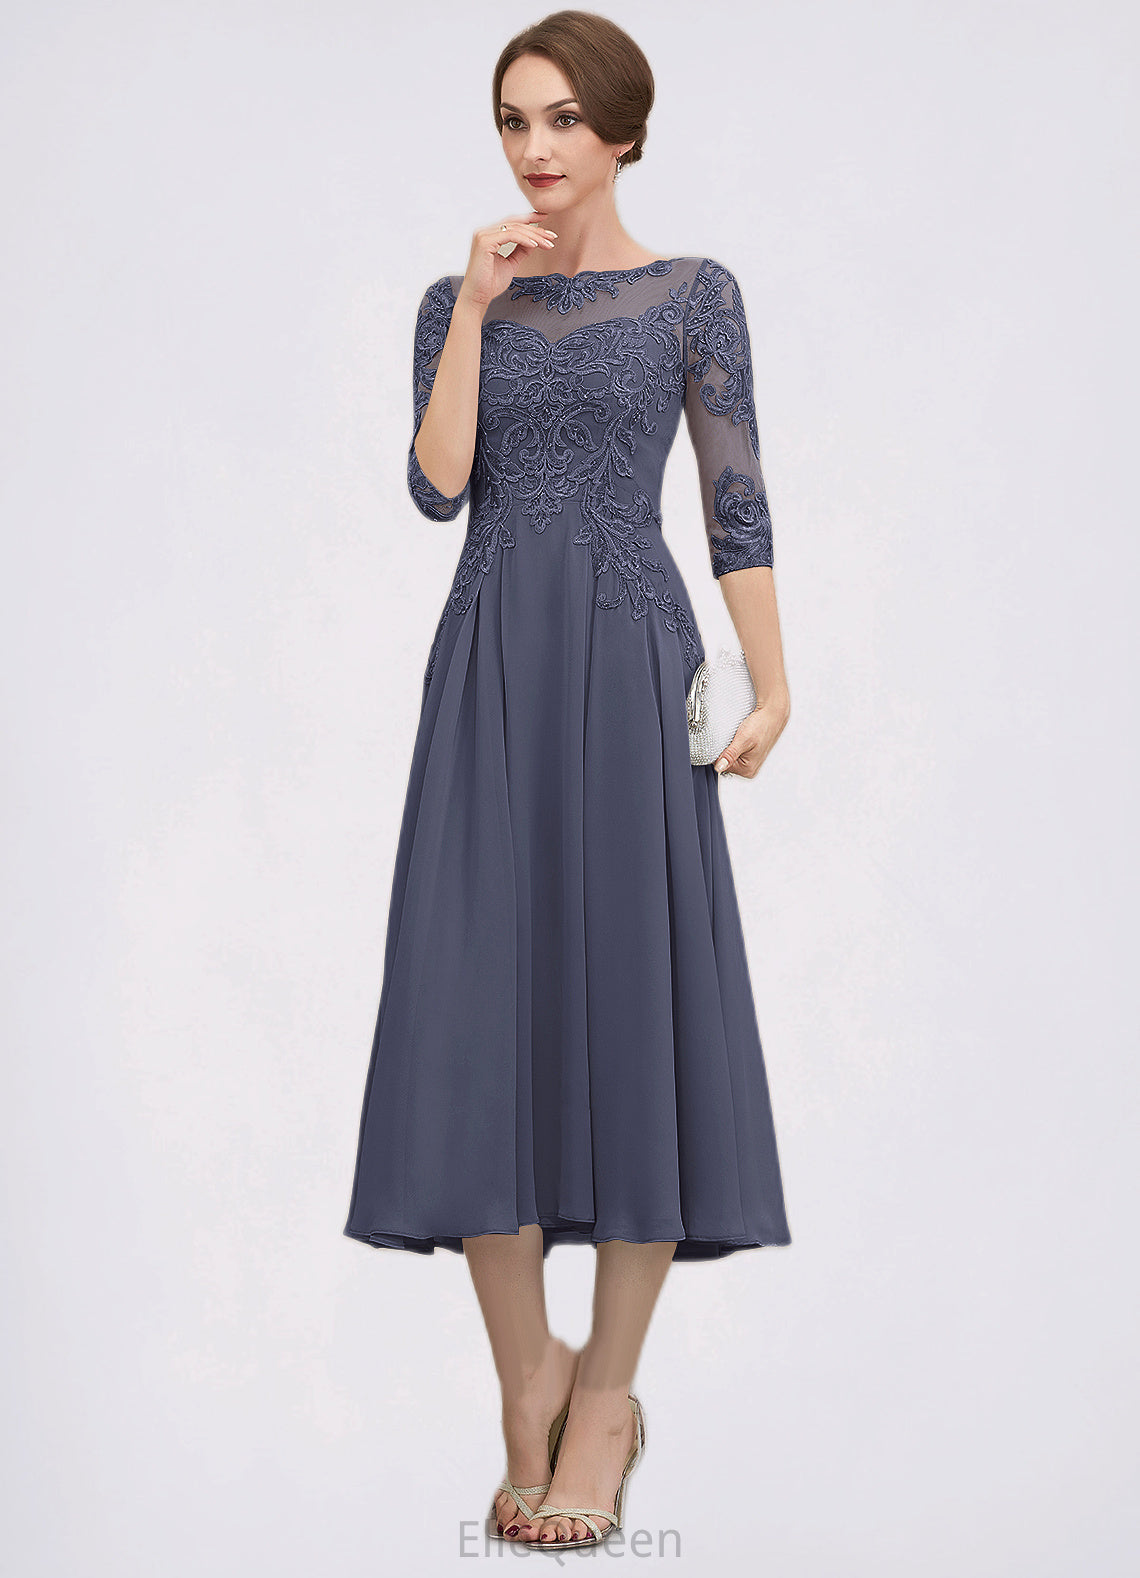 Riley A-Line Scoop Neck Tea-Length Chiffon Lace Mother of the Bride Dress With Beading Sequins DG126P0014535